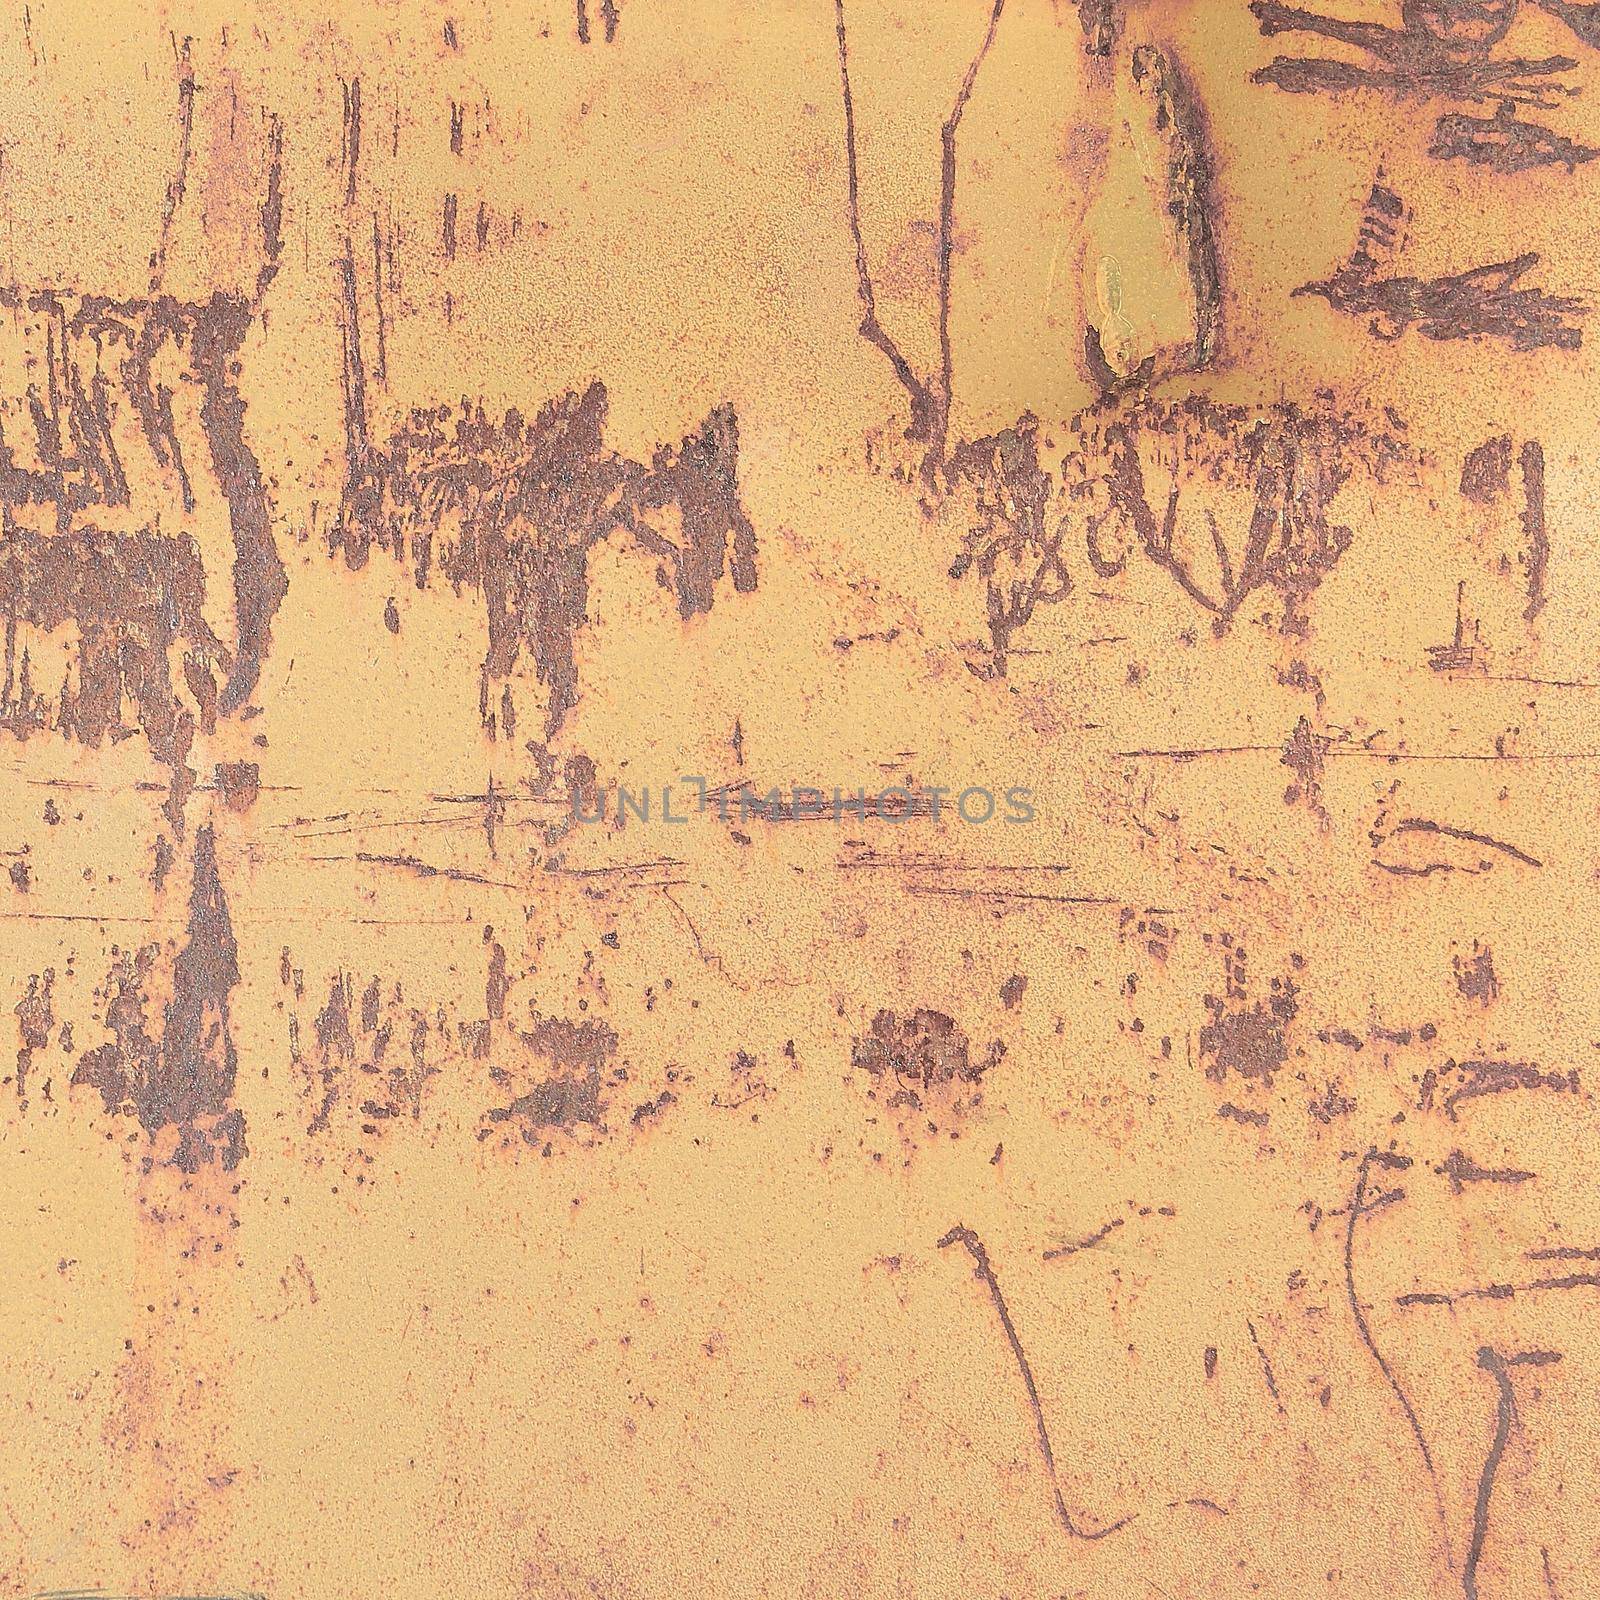 old rough surface with graffiti elements.abstract background.